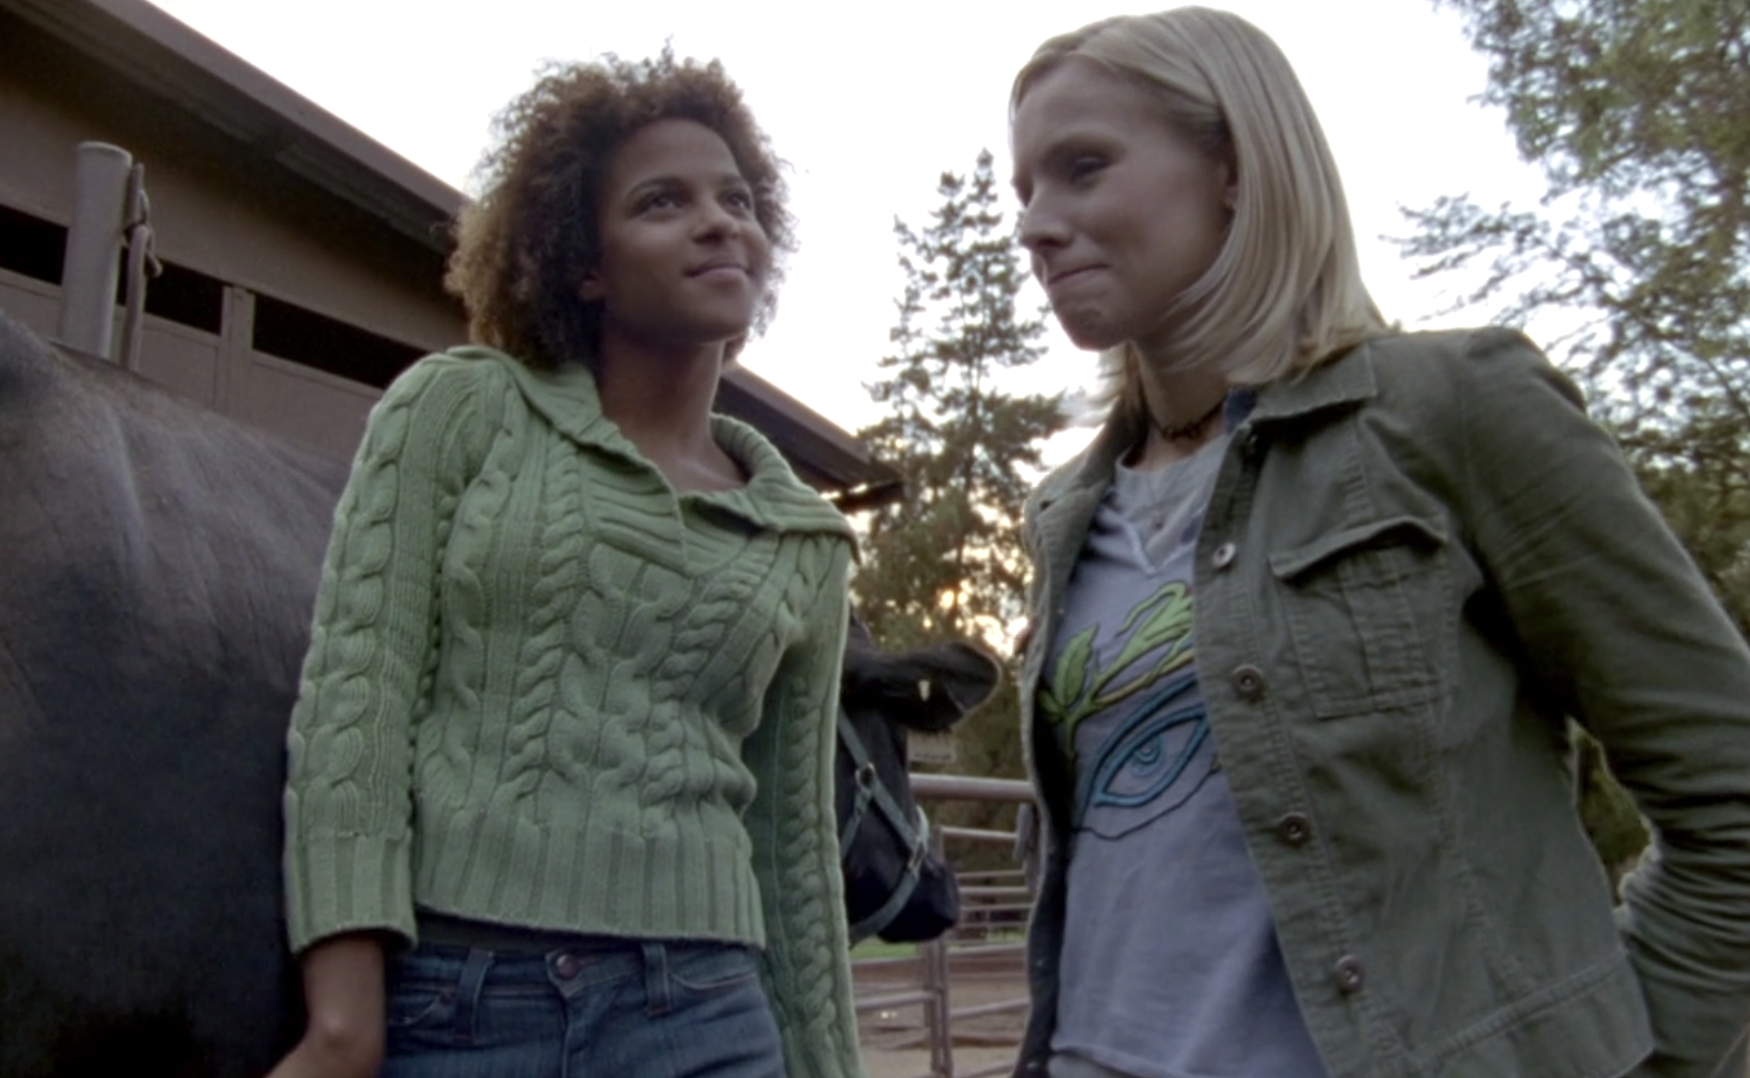 Screenshot from S1E9 of Veronica Mars. Rain and Veronica are standing at the farm next to a cow, which Rain is petting. They are talking. Rain is smiling and looking into the distance. Veronica is smiling awkwardly.